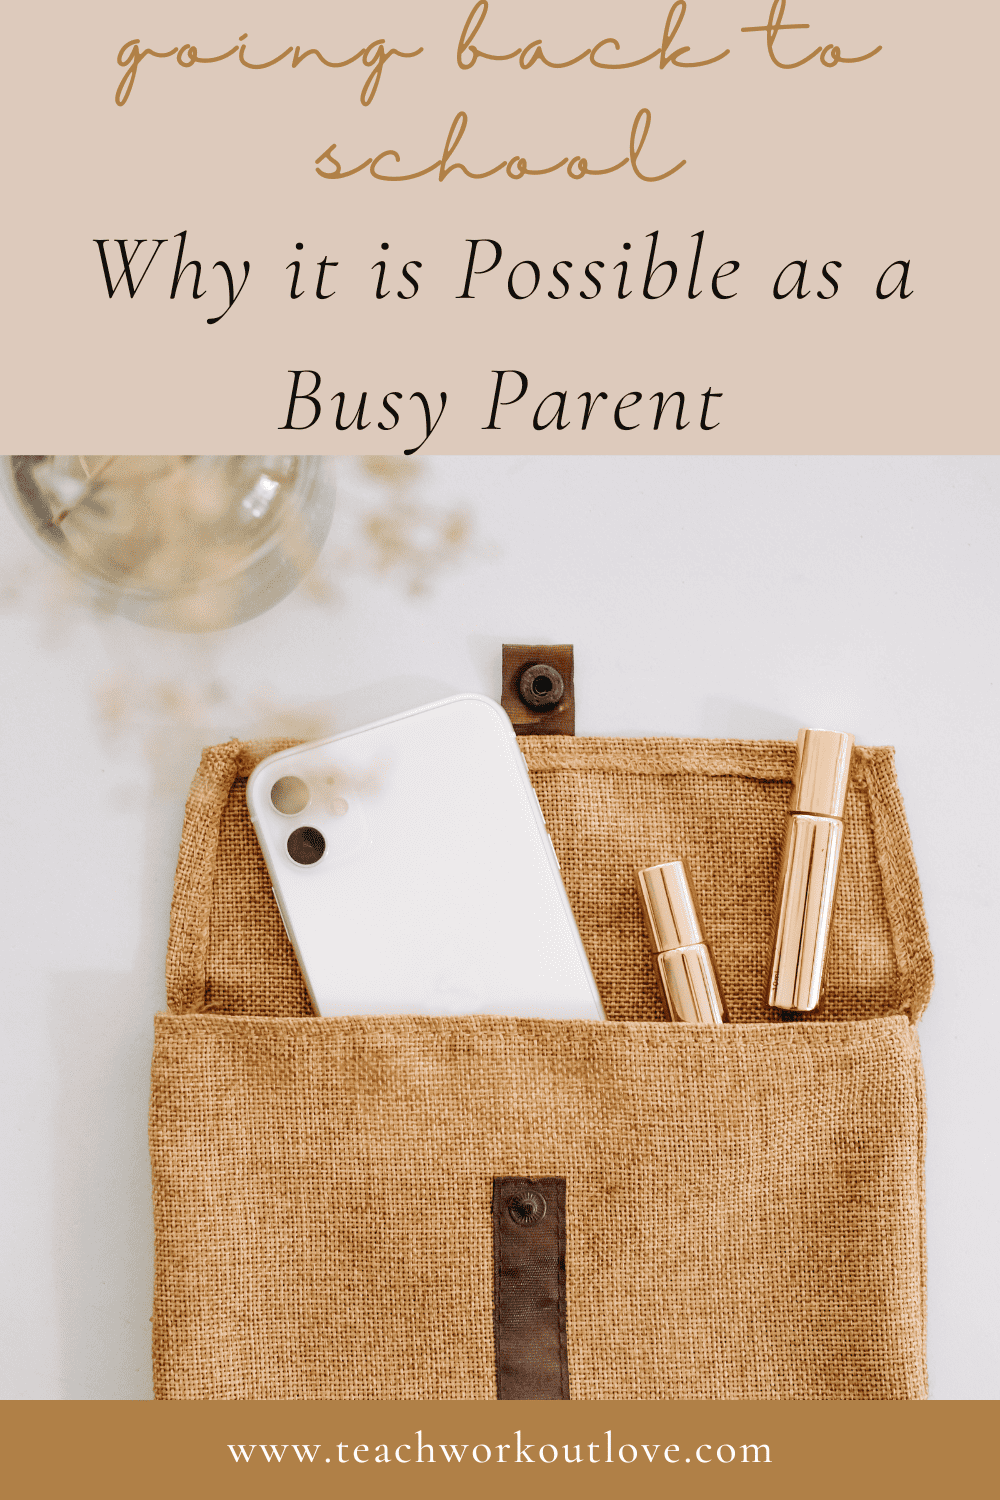 T.W.L is a community for working moms.I n this article, we take a look at why now is the perfect time for parents to go back to school.